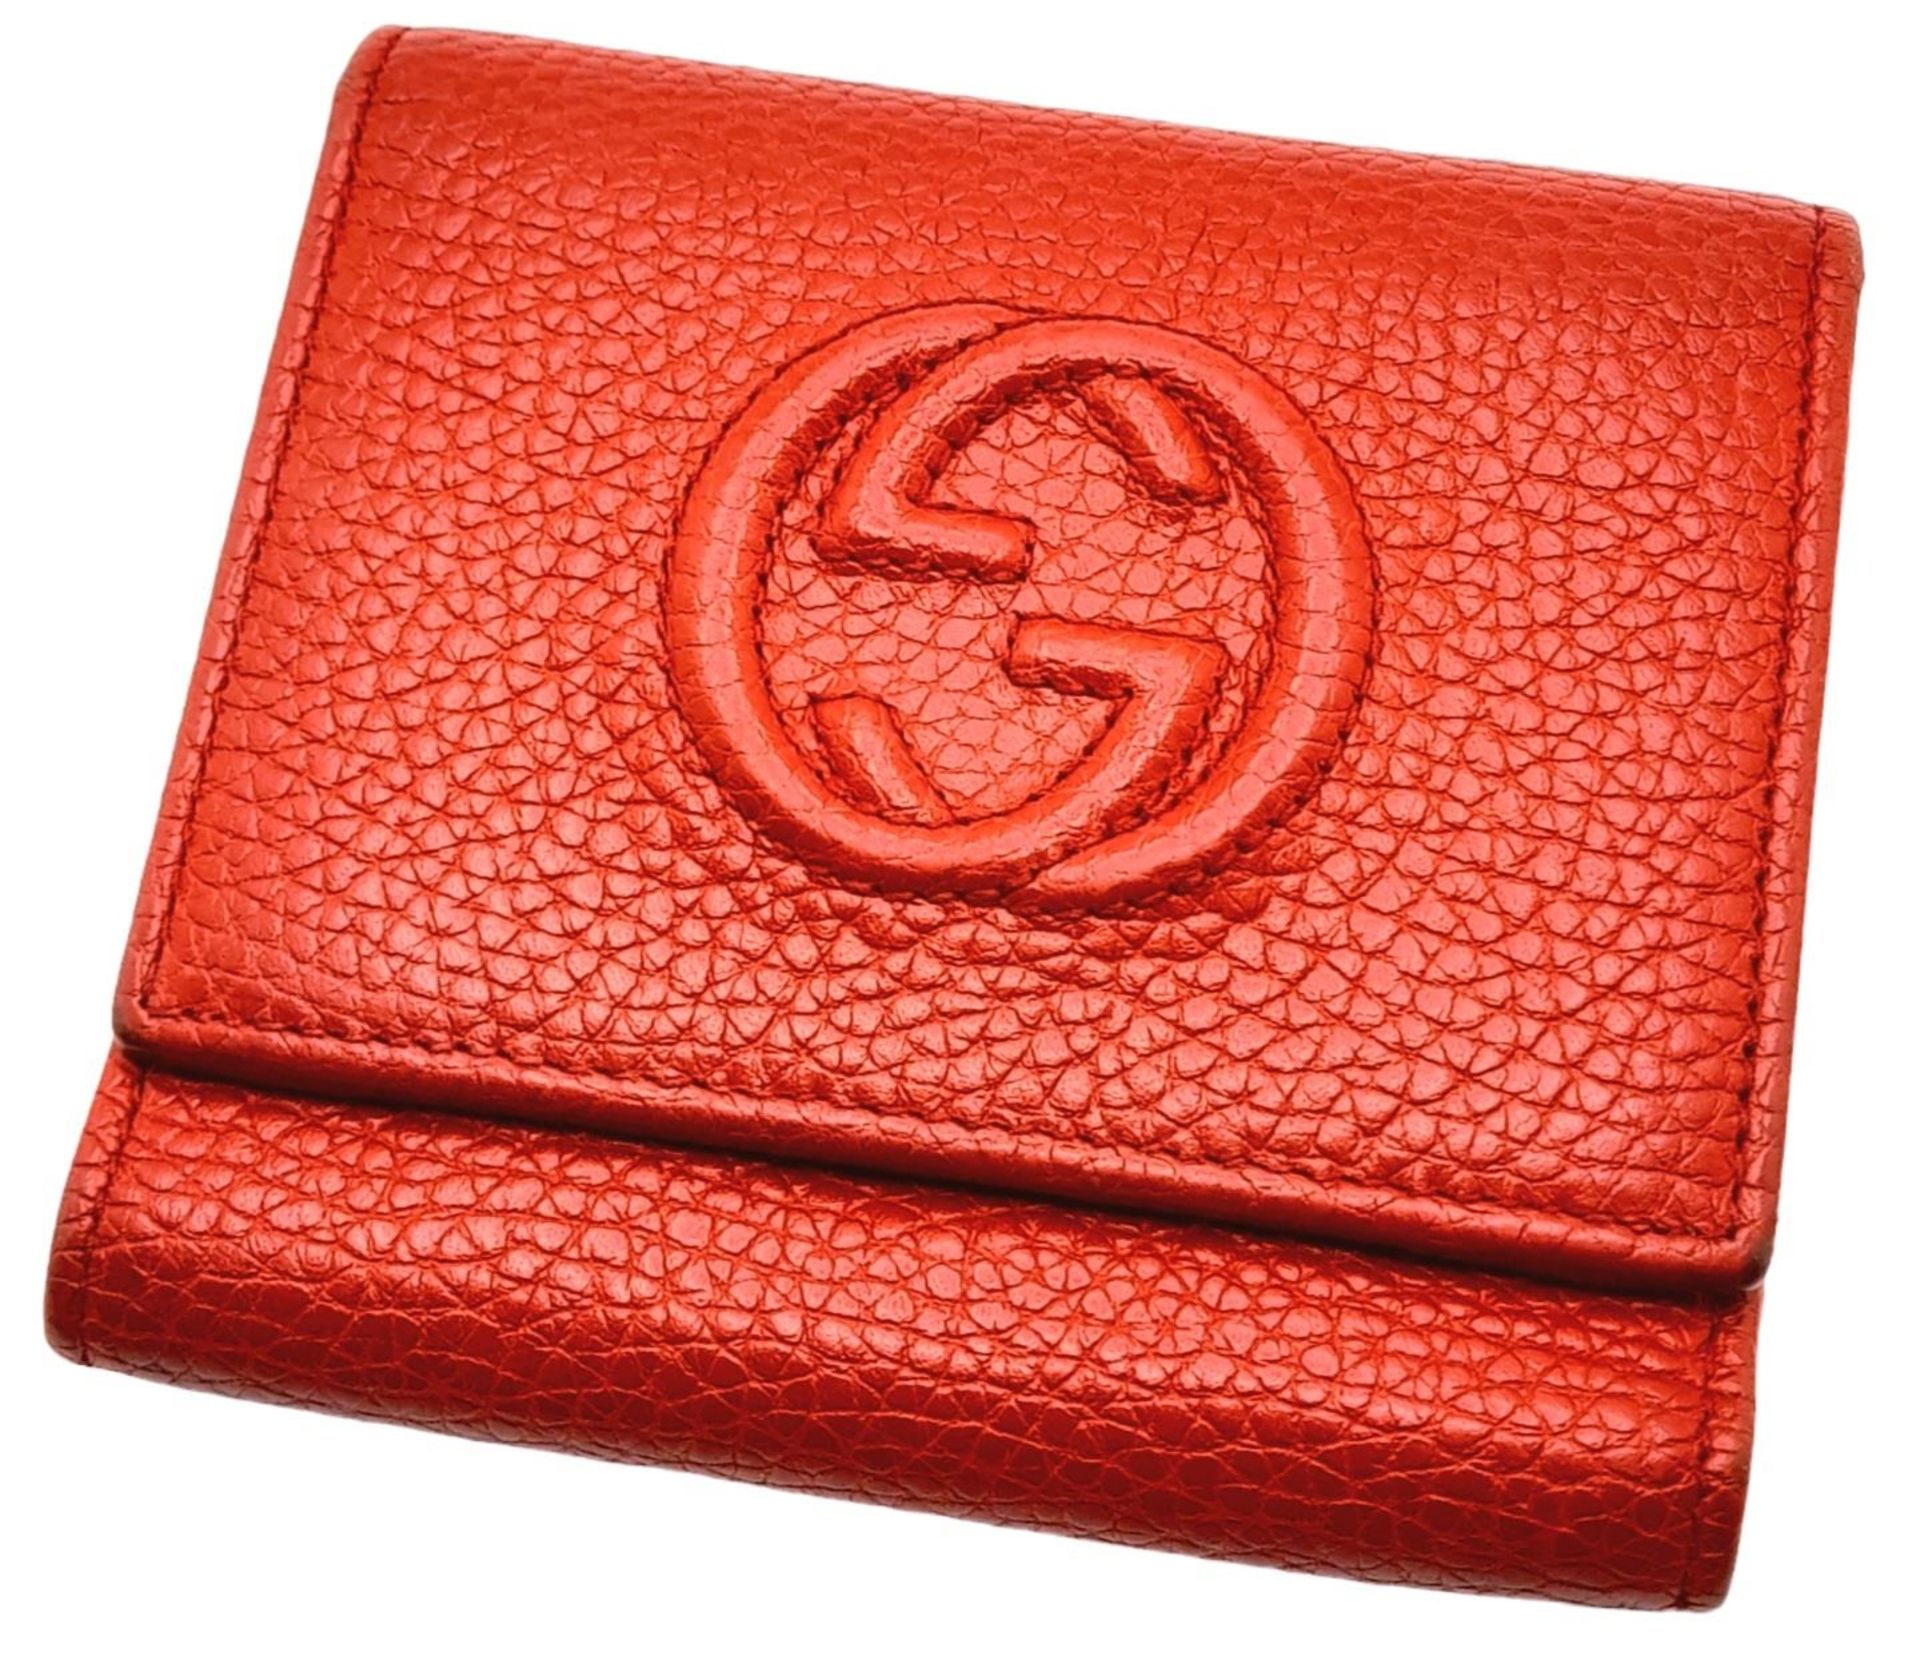 A Gucci Red Trifold Wallet. Leather exterior with the GG logo and press stud closure. Red leather